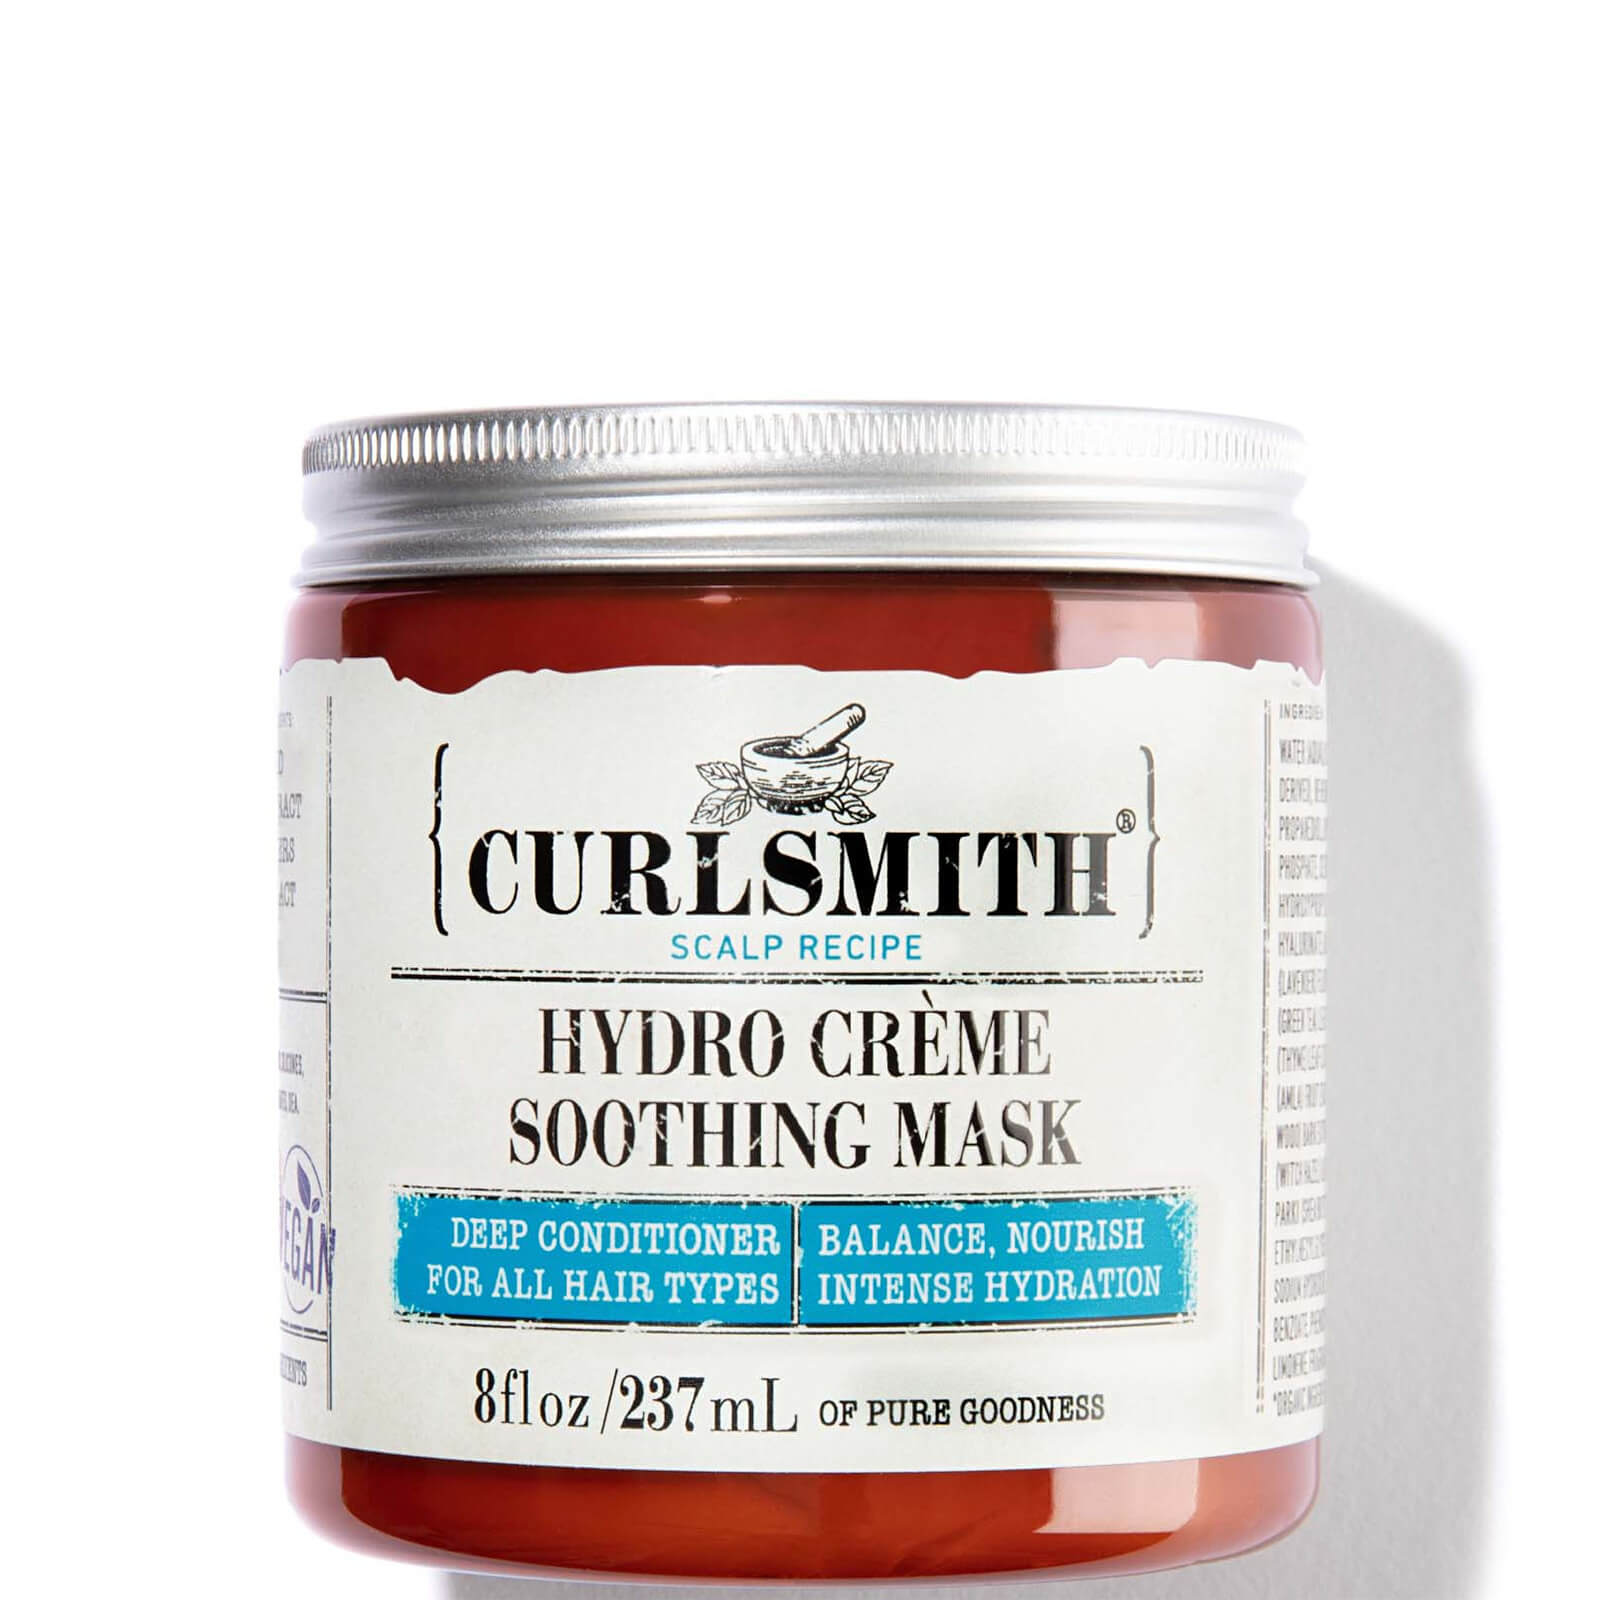 Image of Curlsmith Hydro Crème Soothing Mask 237ml